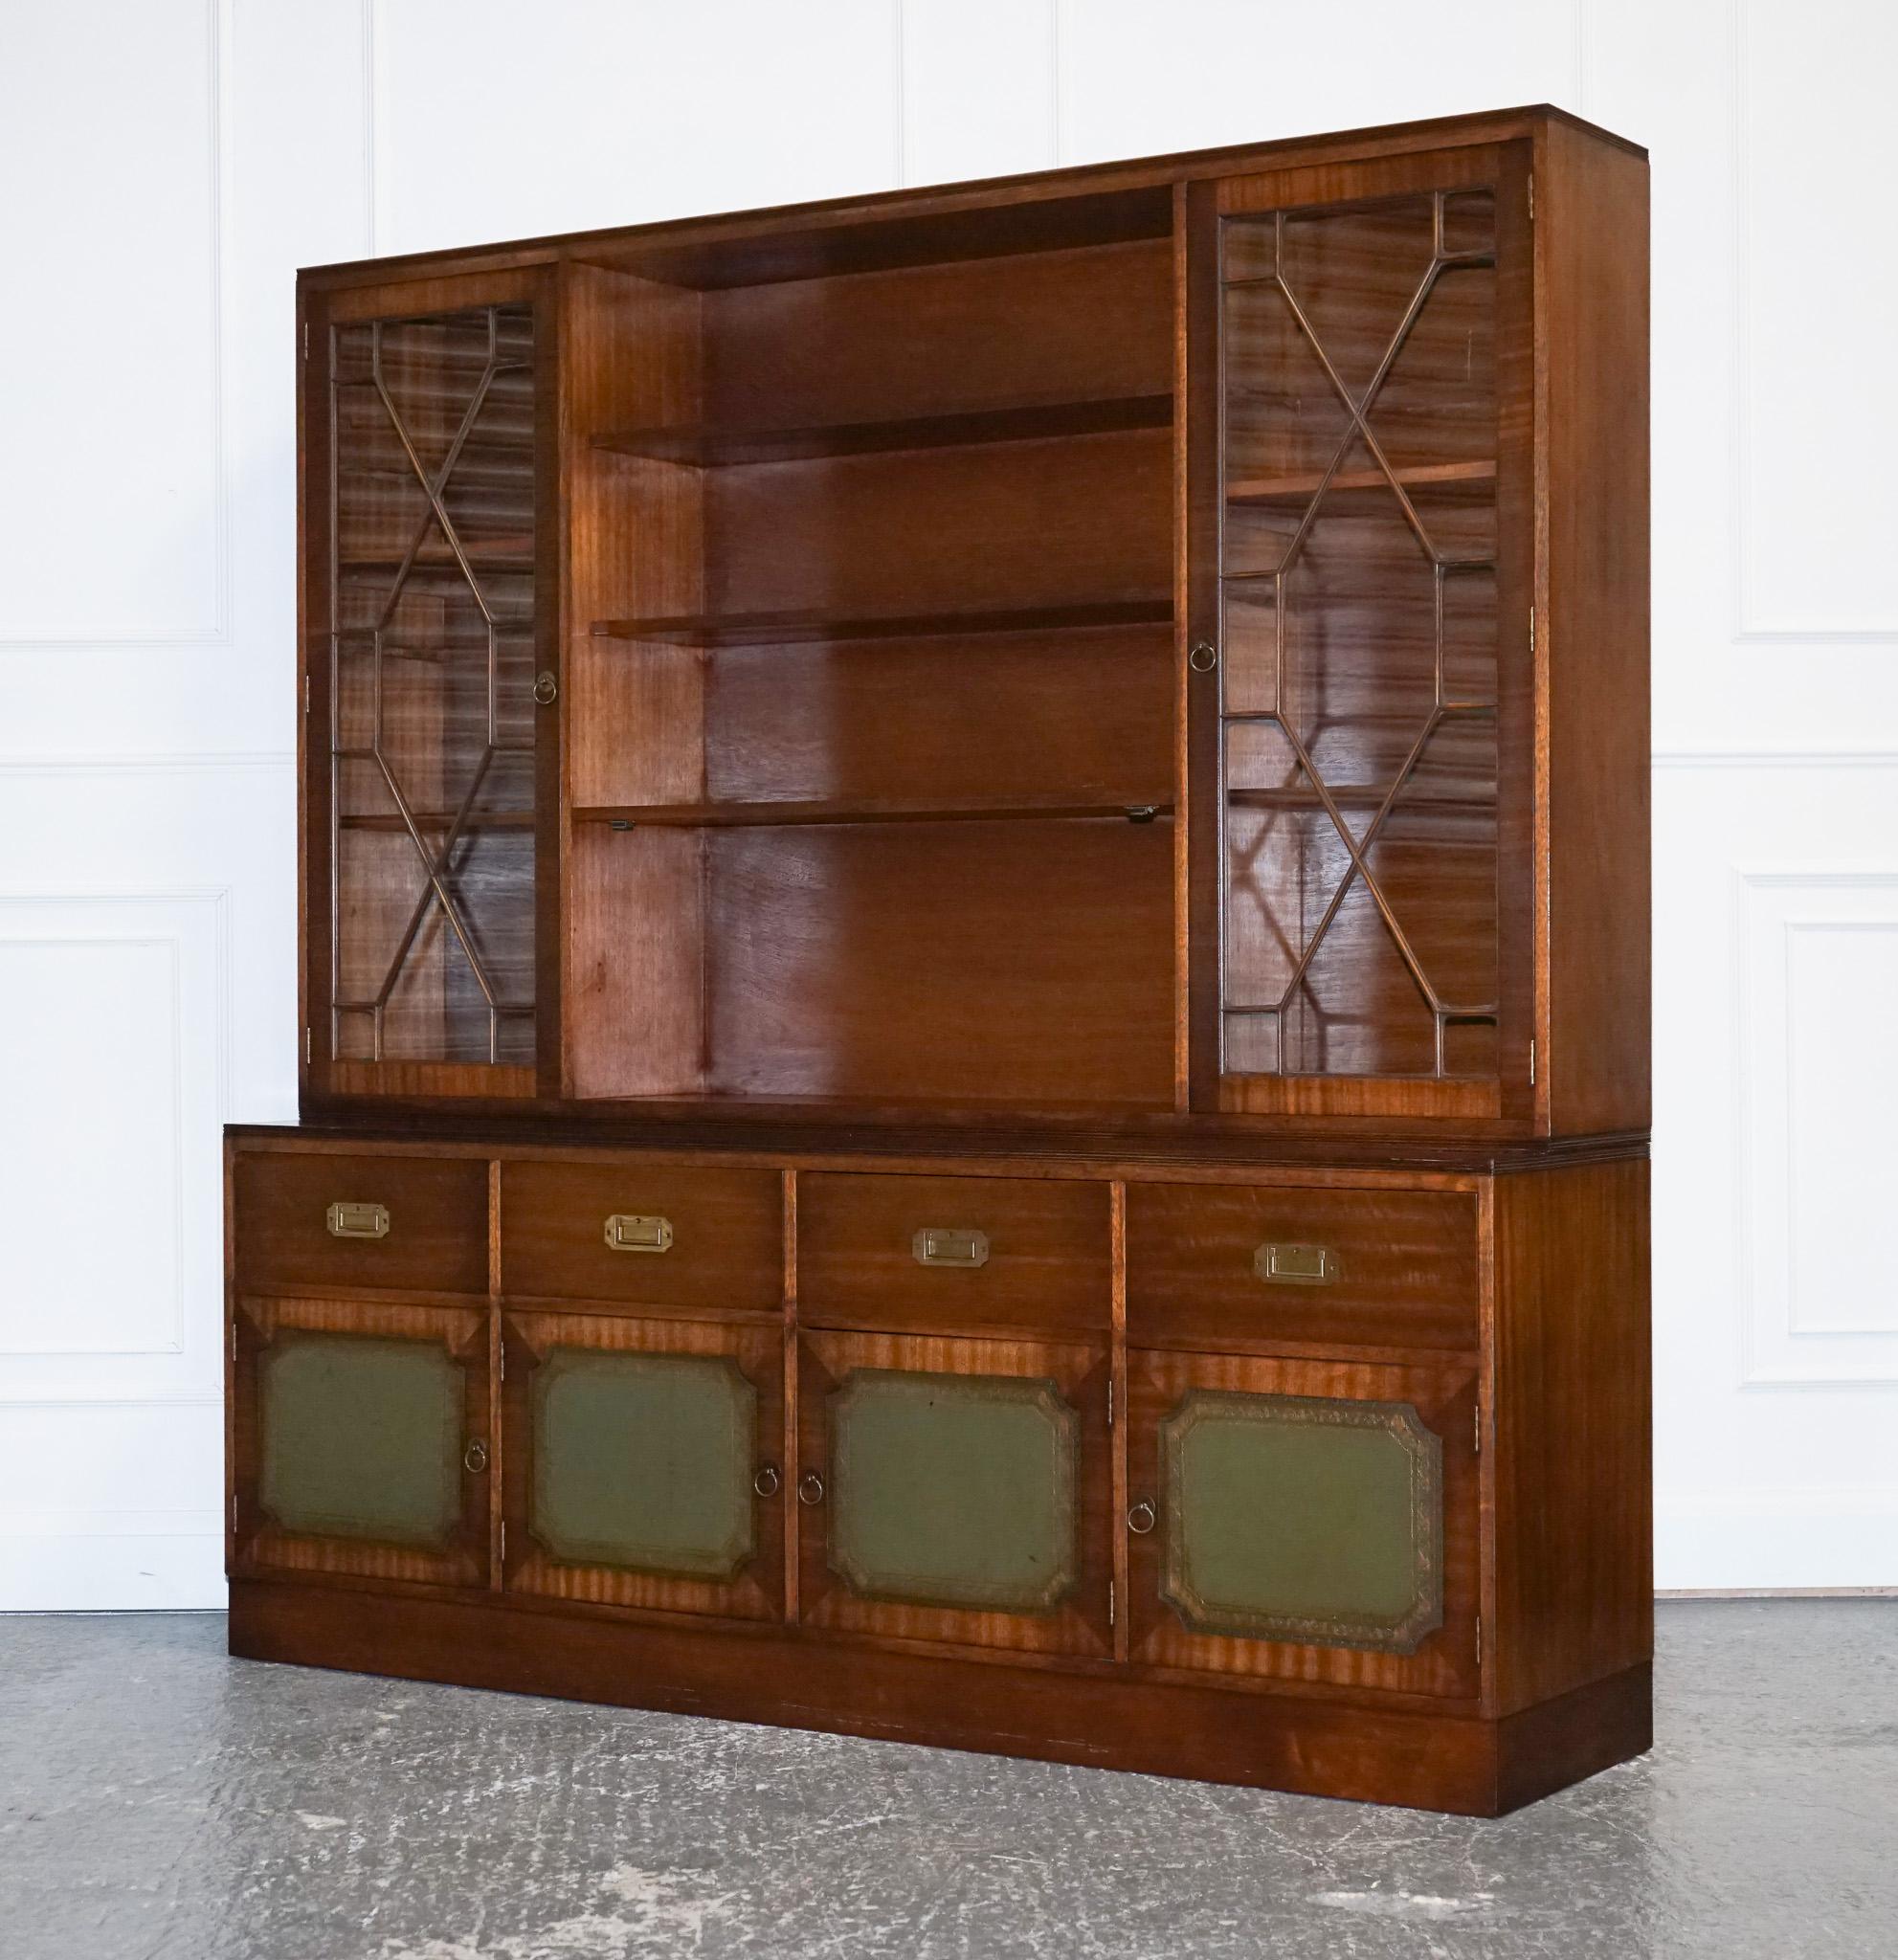 We are delighted to offer for sale this Lovely Bevan Funnell Bookcase With Embossed Leather Bookcase.

The Bevan Funnel Military Campaign Bookcase is a true work of art. 

This stunning piece of furniture showcases a classic vintage design that